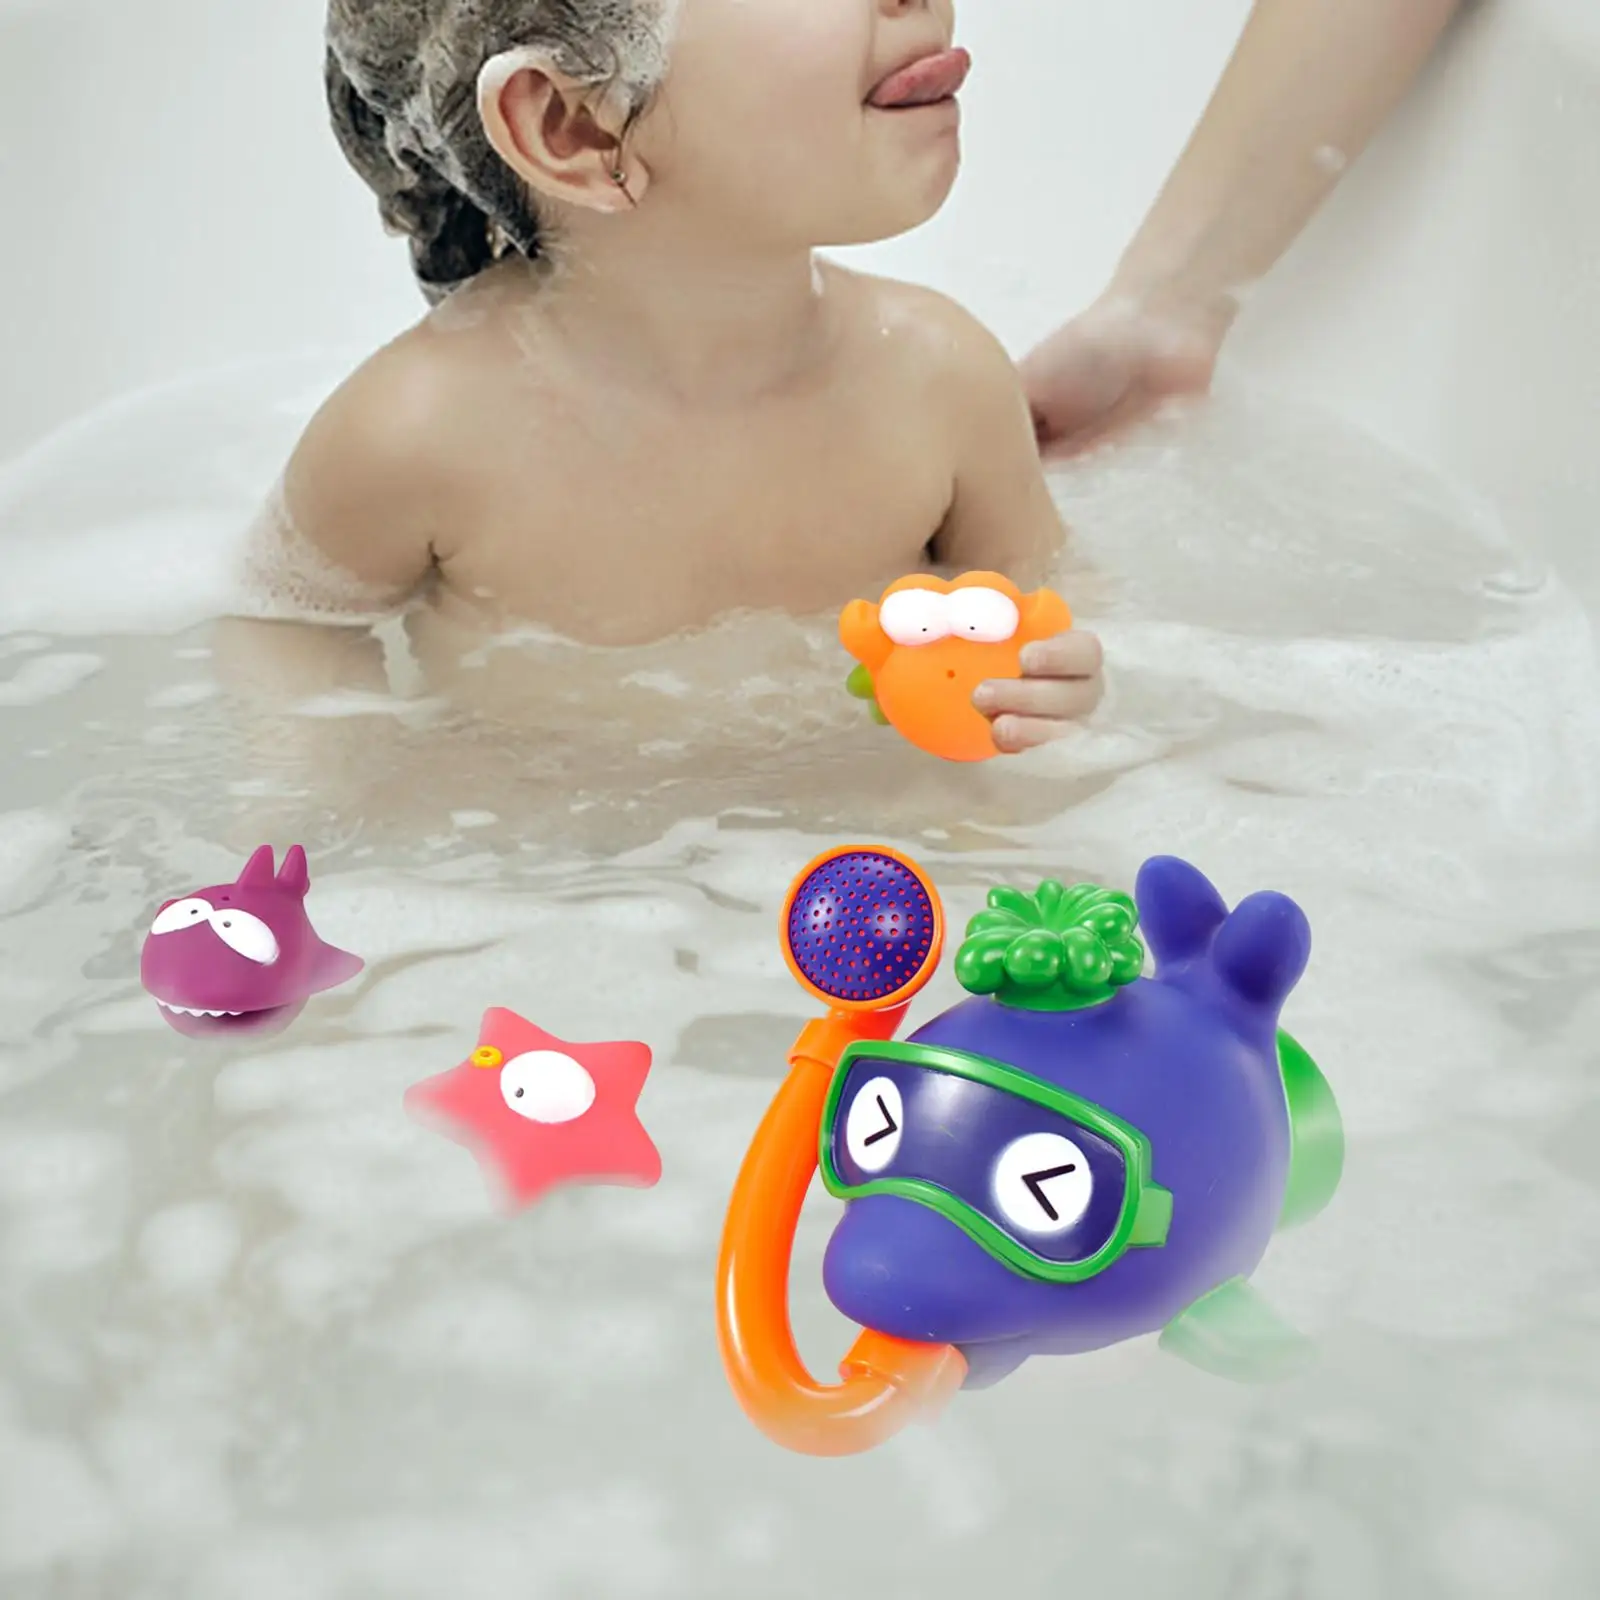 Bath Water Toys Interaction Bathroom Baby Toy Bathtub Pool Toys Bathing Water Toys for Kids Boys Toddlers Children Holiday Gifts